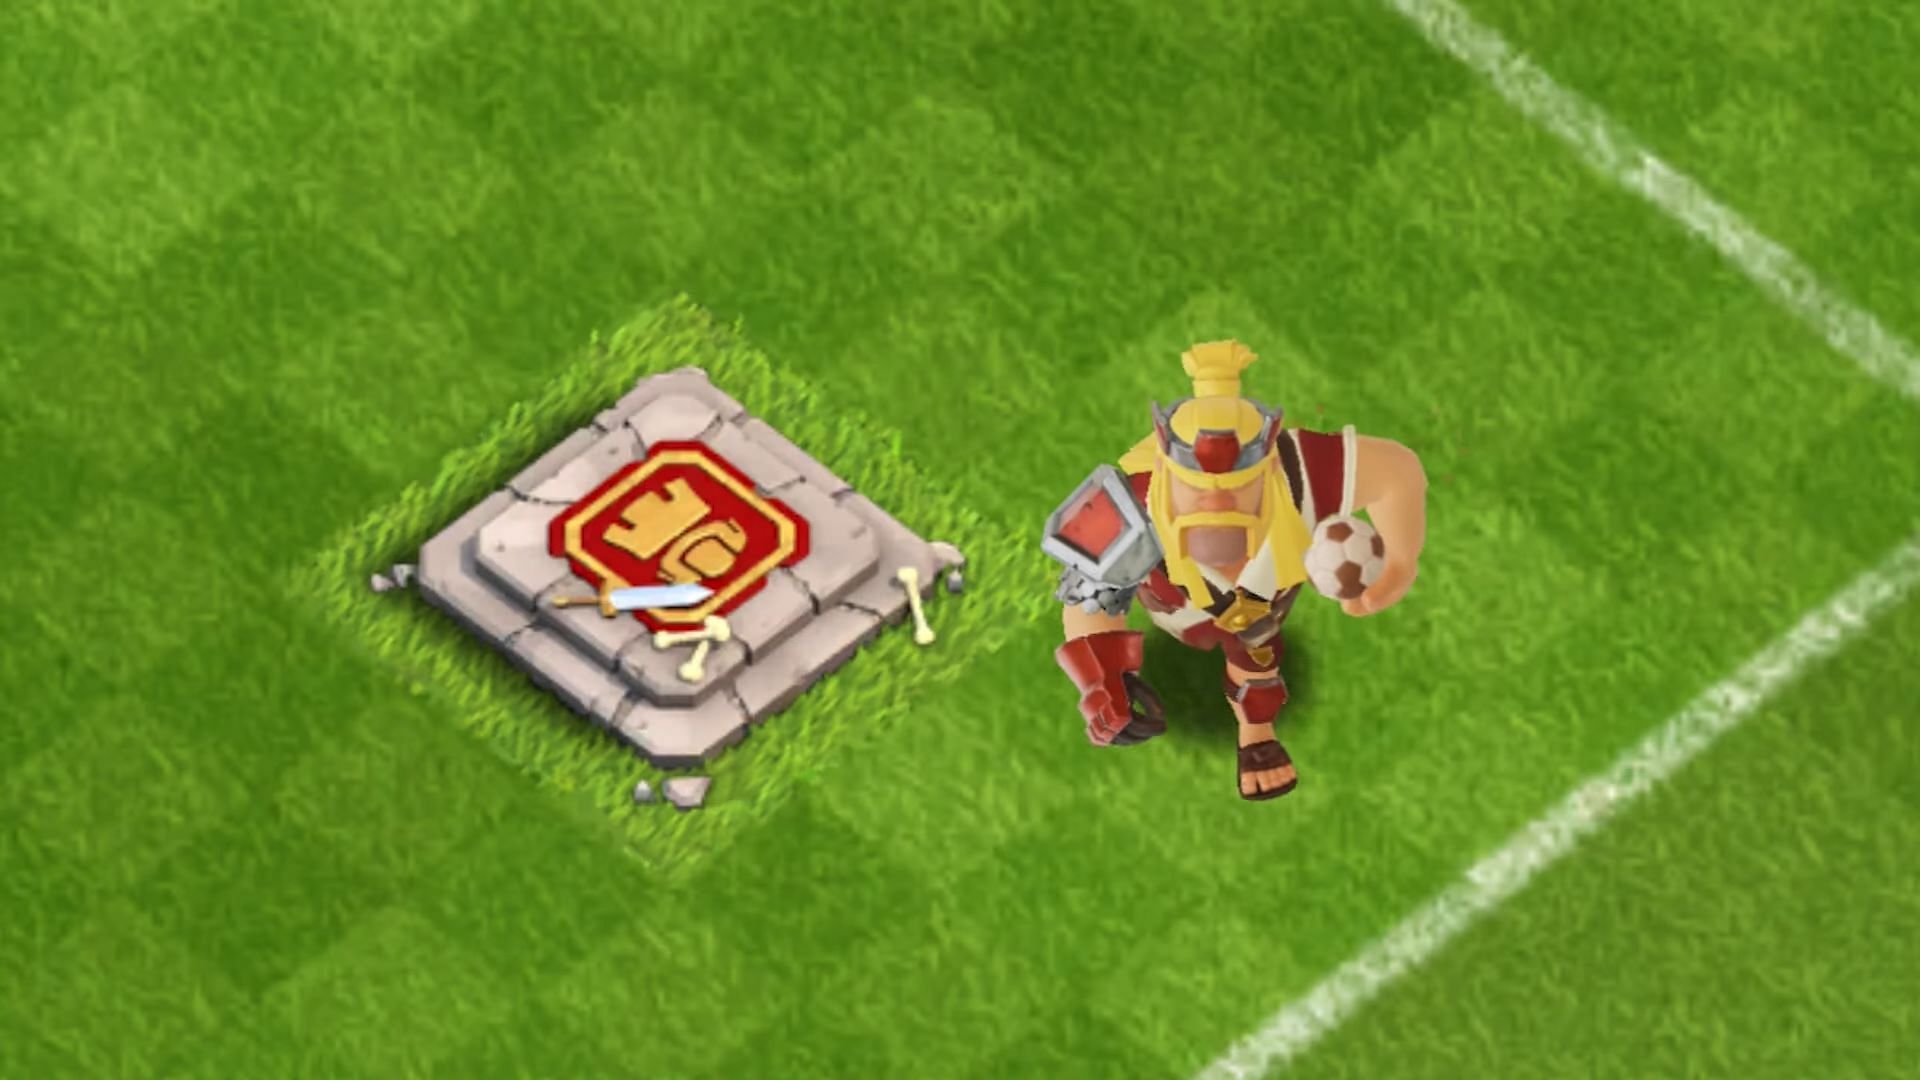 Animations of the Football King Hero (Image via Supercell)